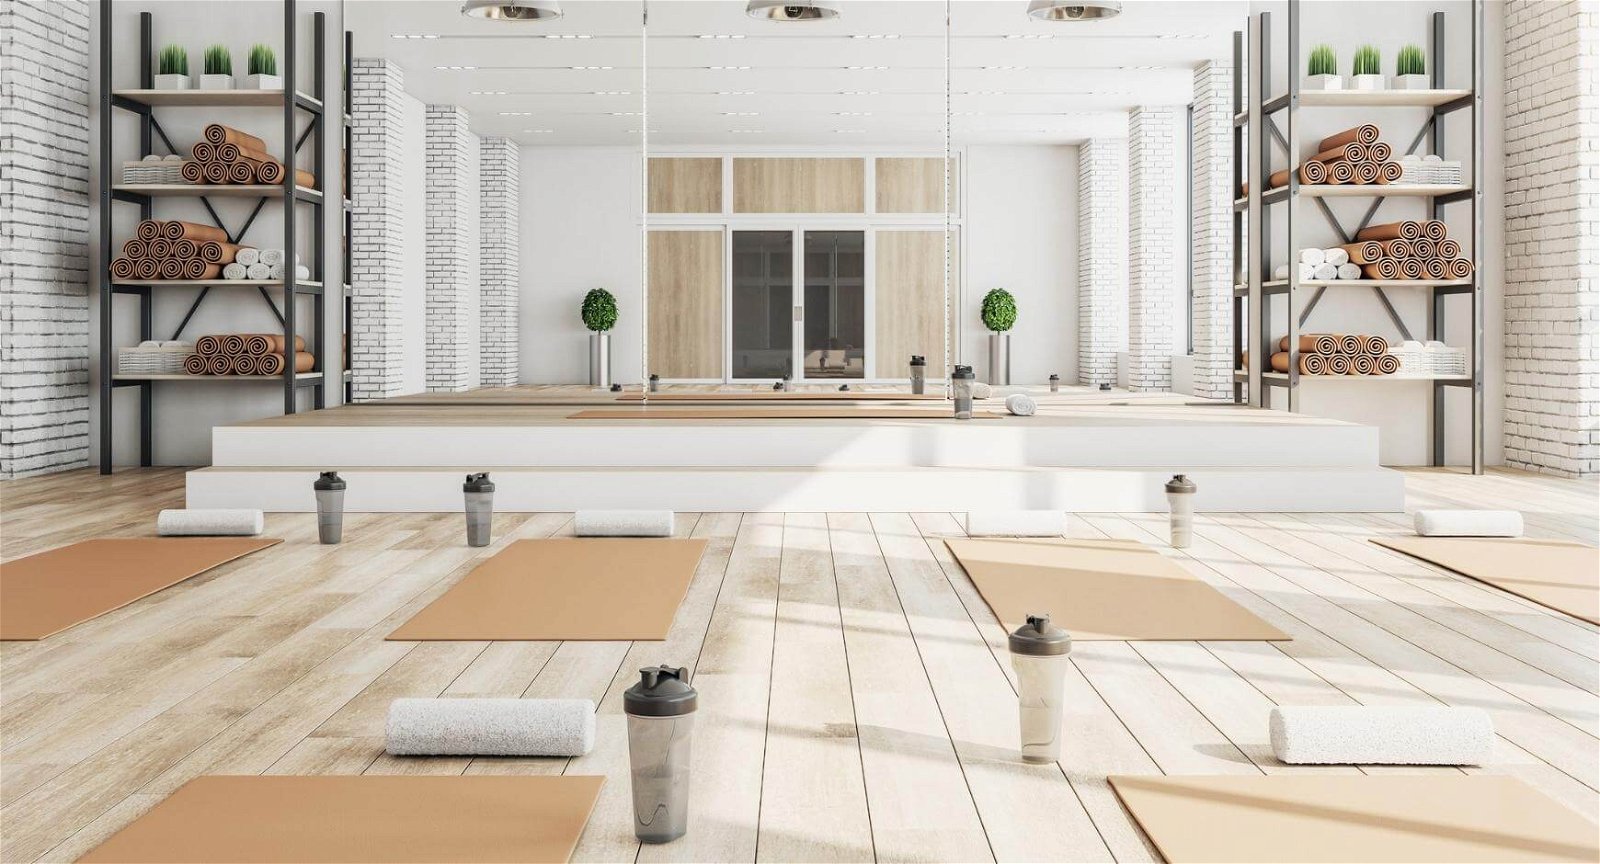 New yoga studio set up for a class